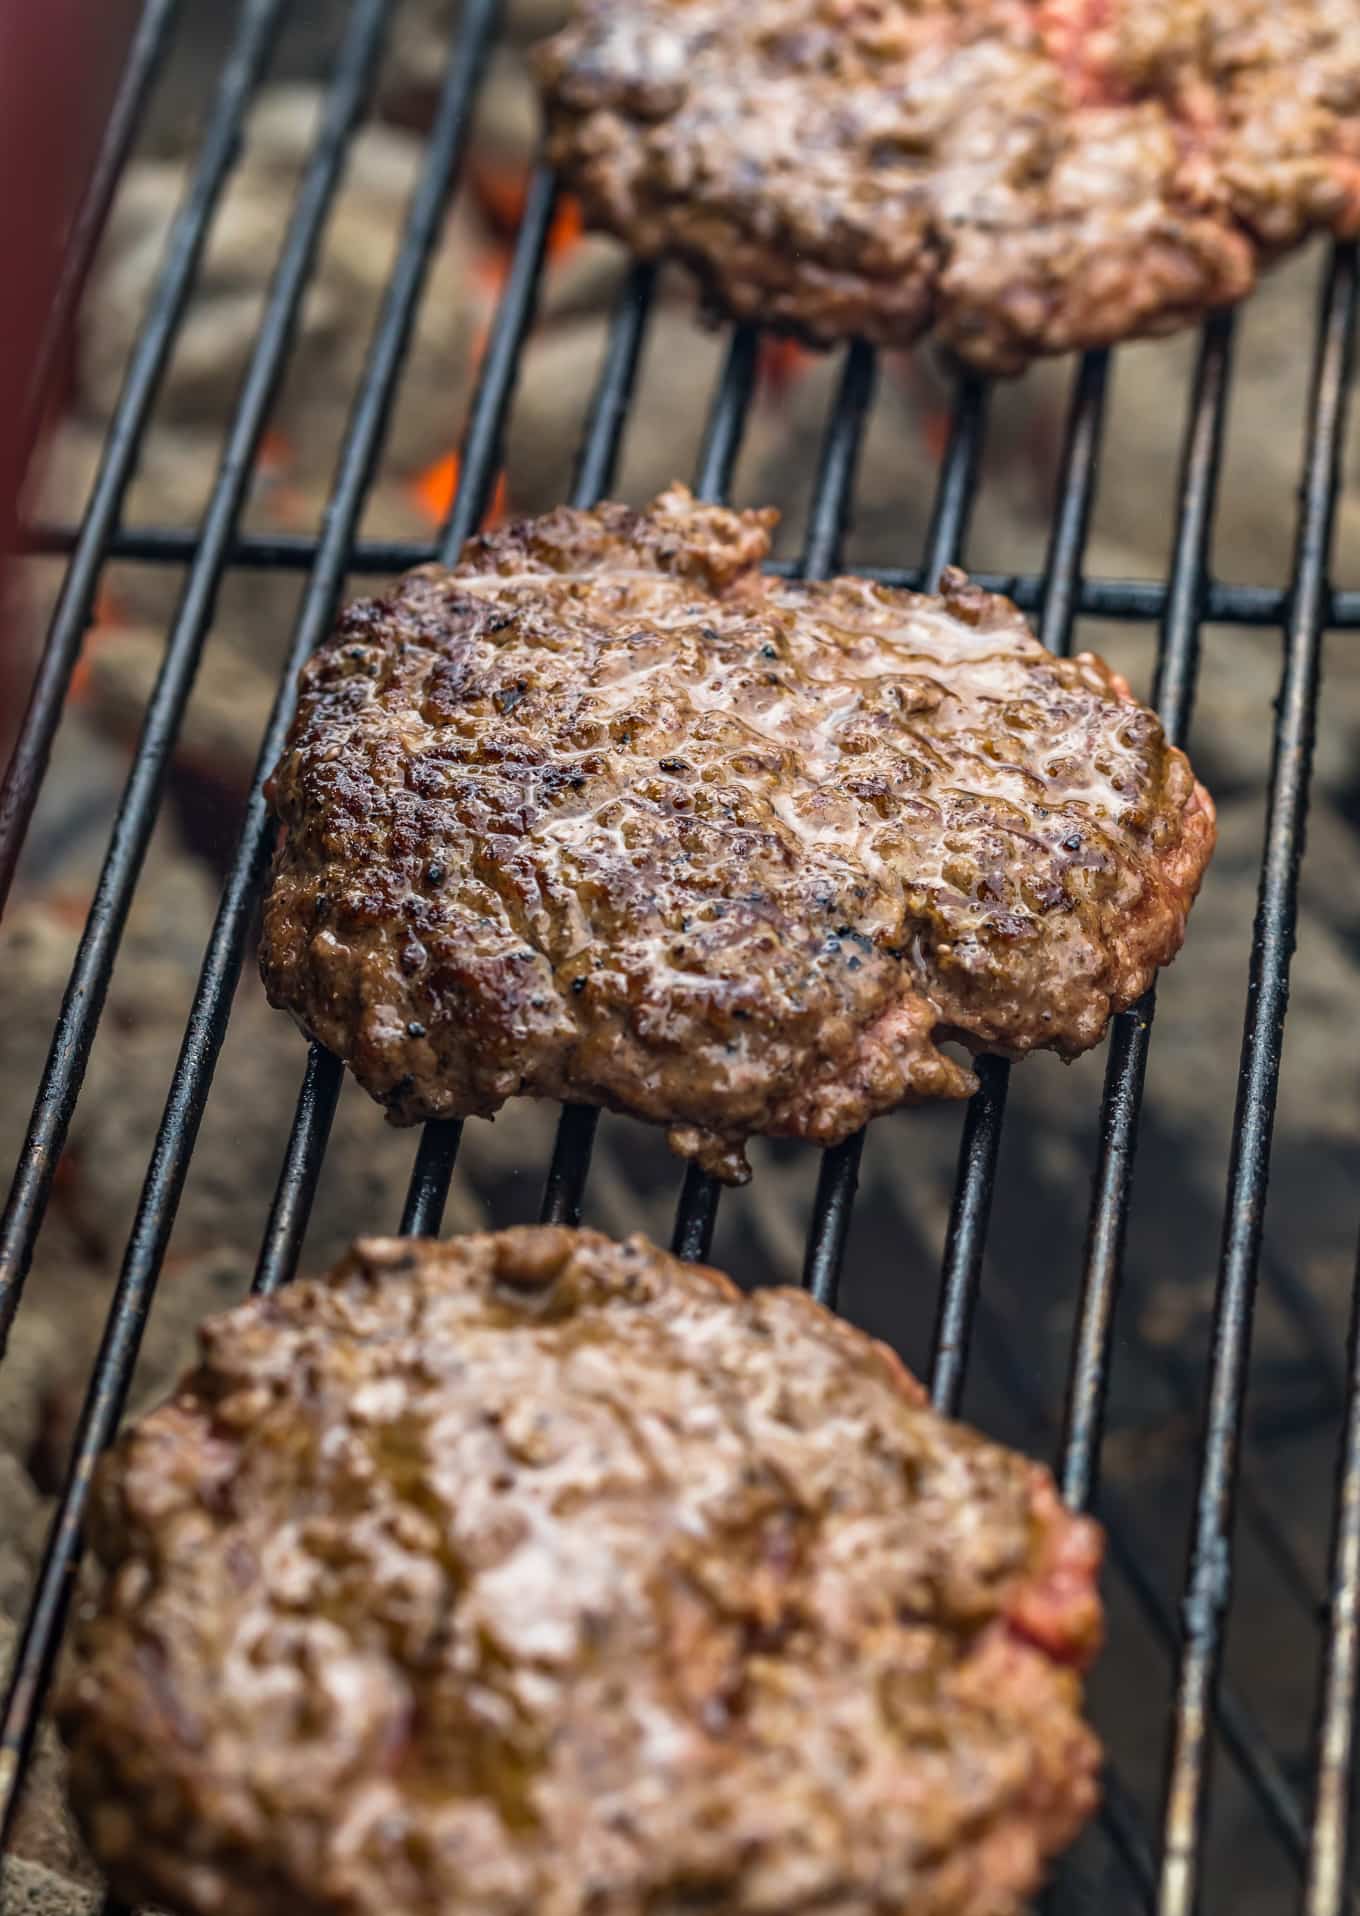 Three cooked burger patties on a grill